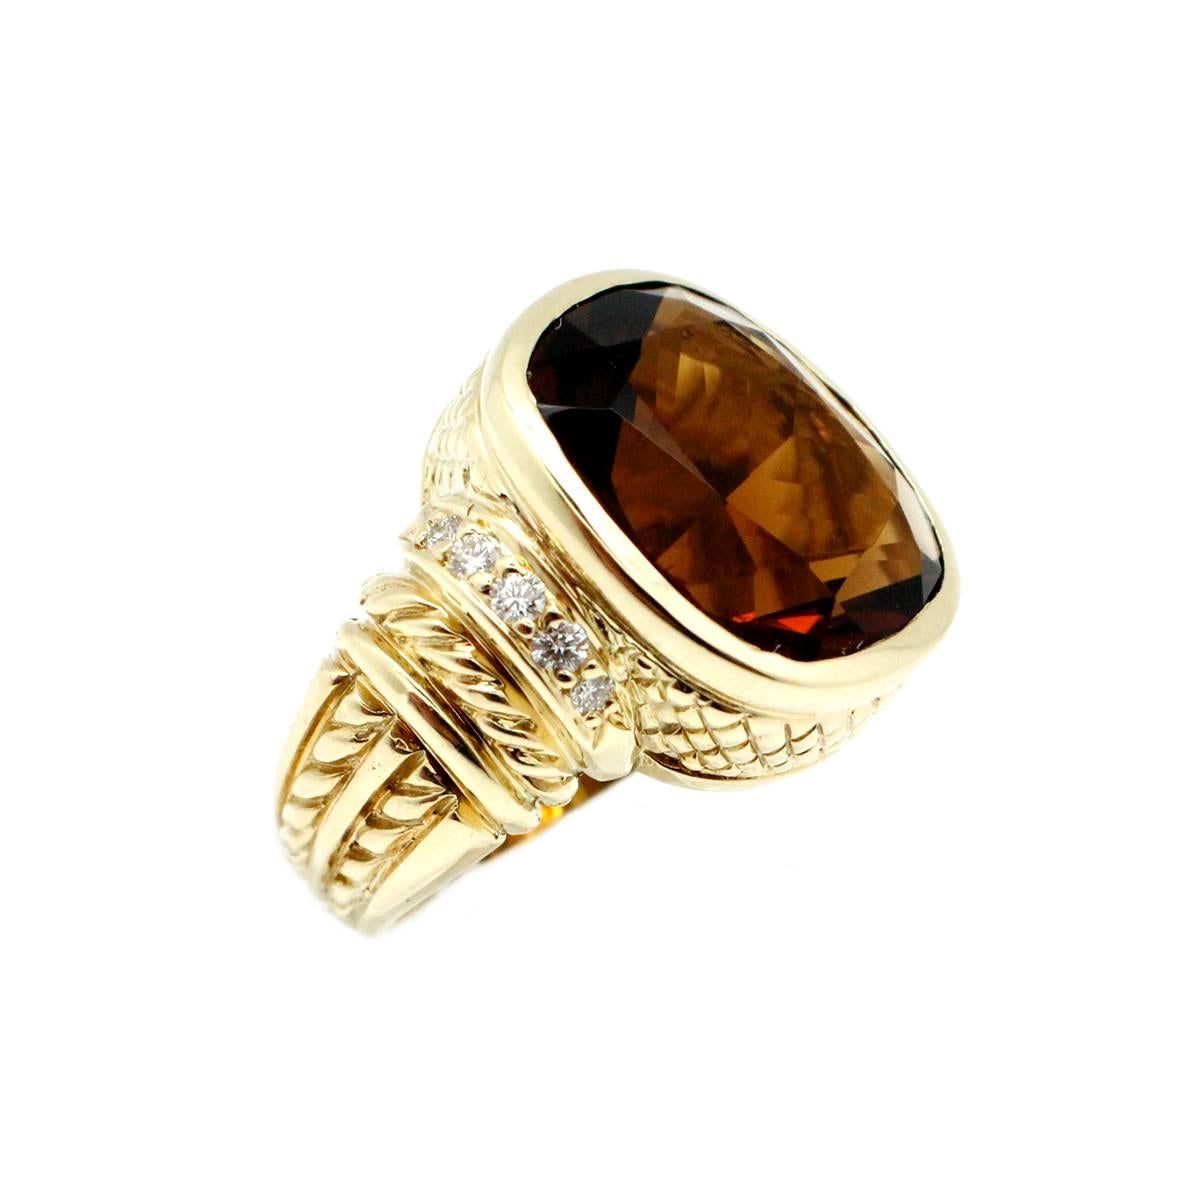 With bold intensity and radiant color in this stunning 18k yellow gold Sun Stone ring, Judith Ripka’s consistent design philosophy over the brand’s 37-year history has made it a favorite among fashion trendsetters and style-savvy women around the